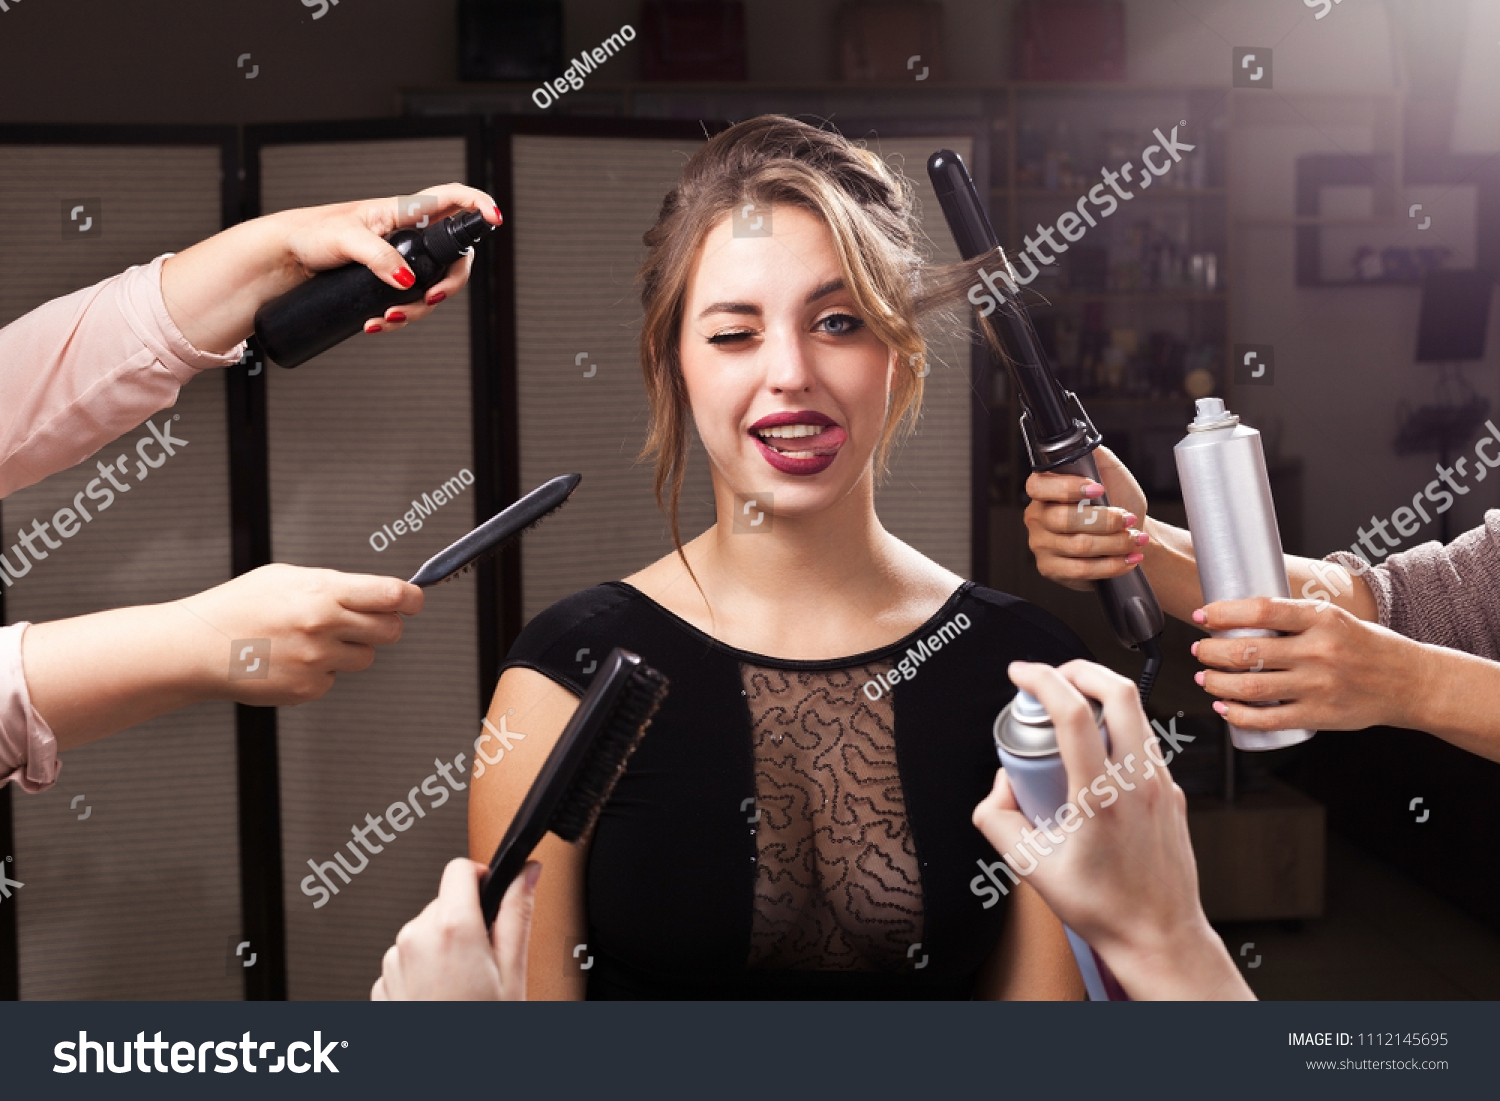 beautiful emotional woman is surrounded by many hands holding hair curler, sprays and brushes. girl is showing a tongue with one eye closed. concept of professional makeup products #1112145695